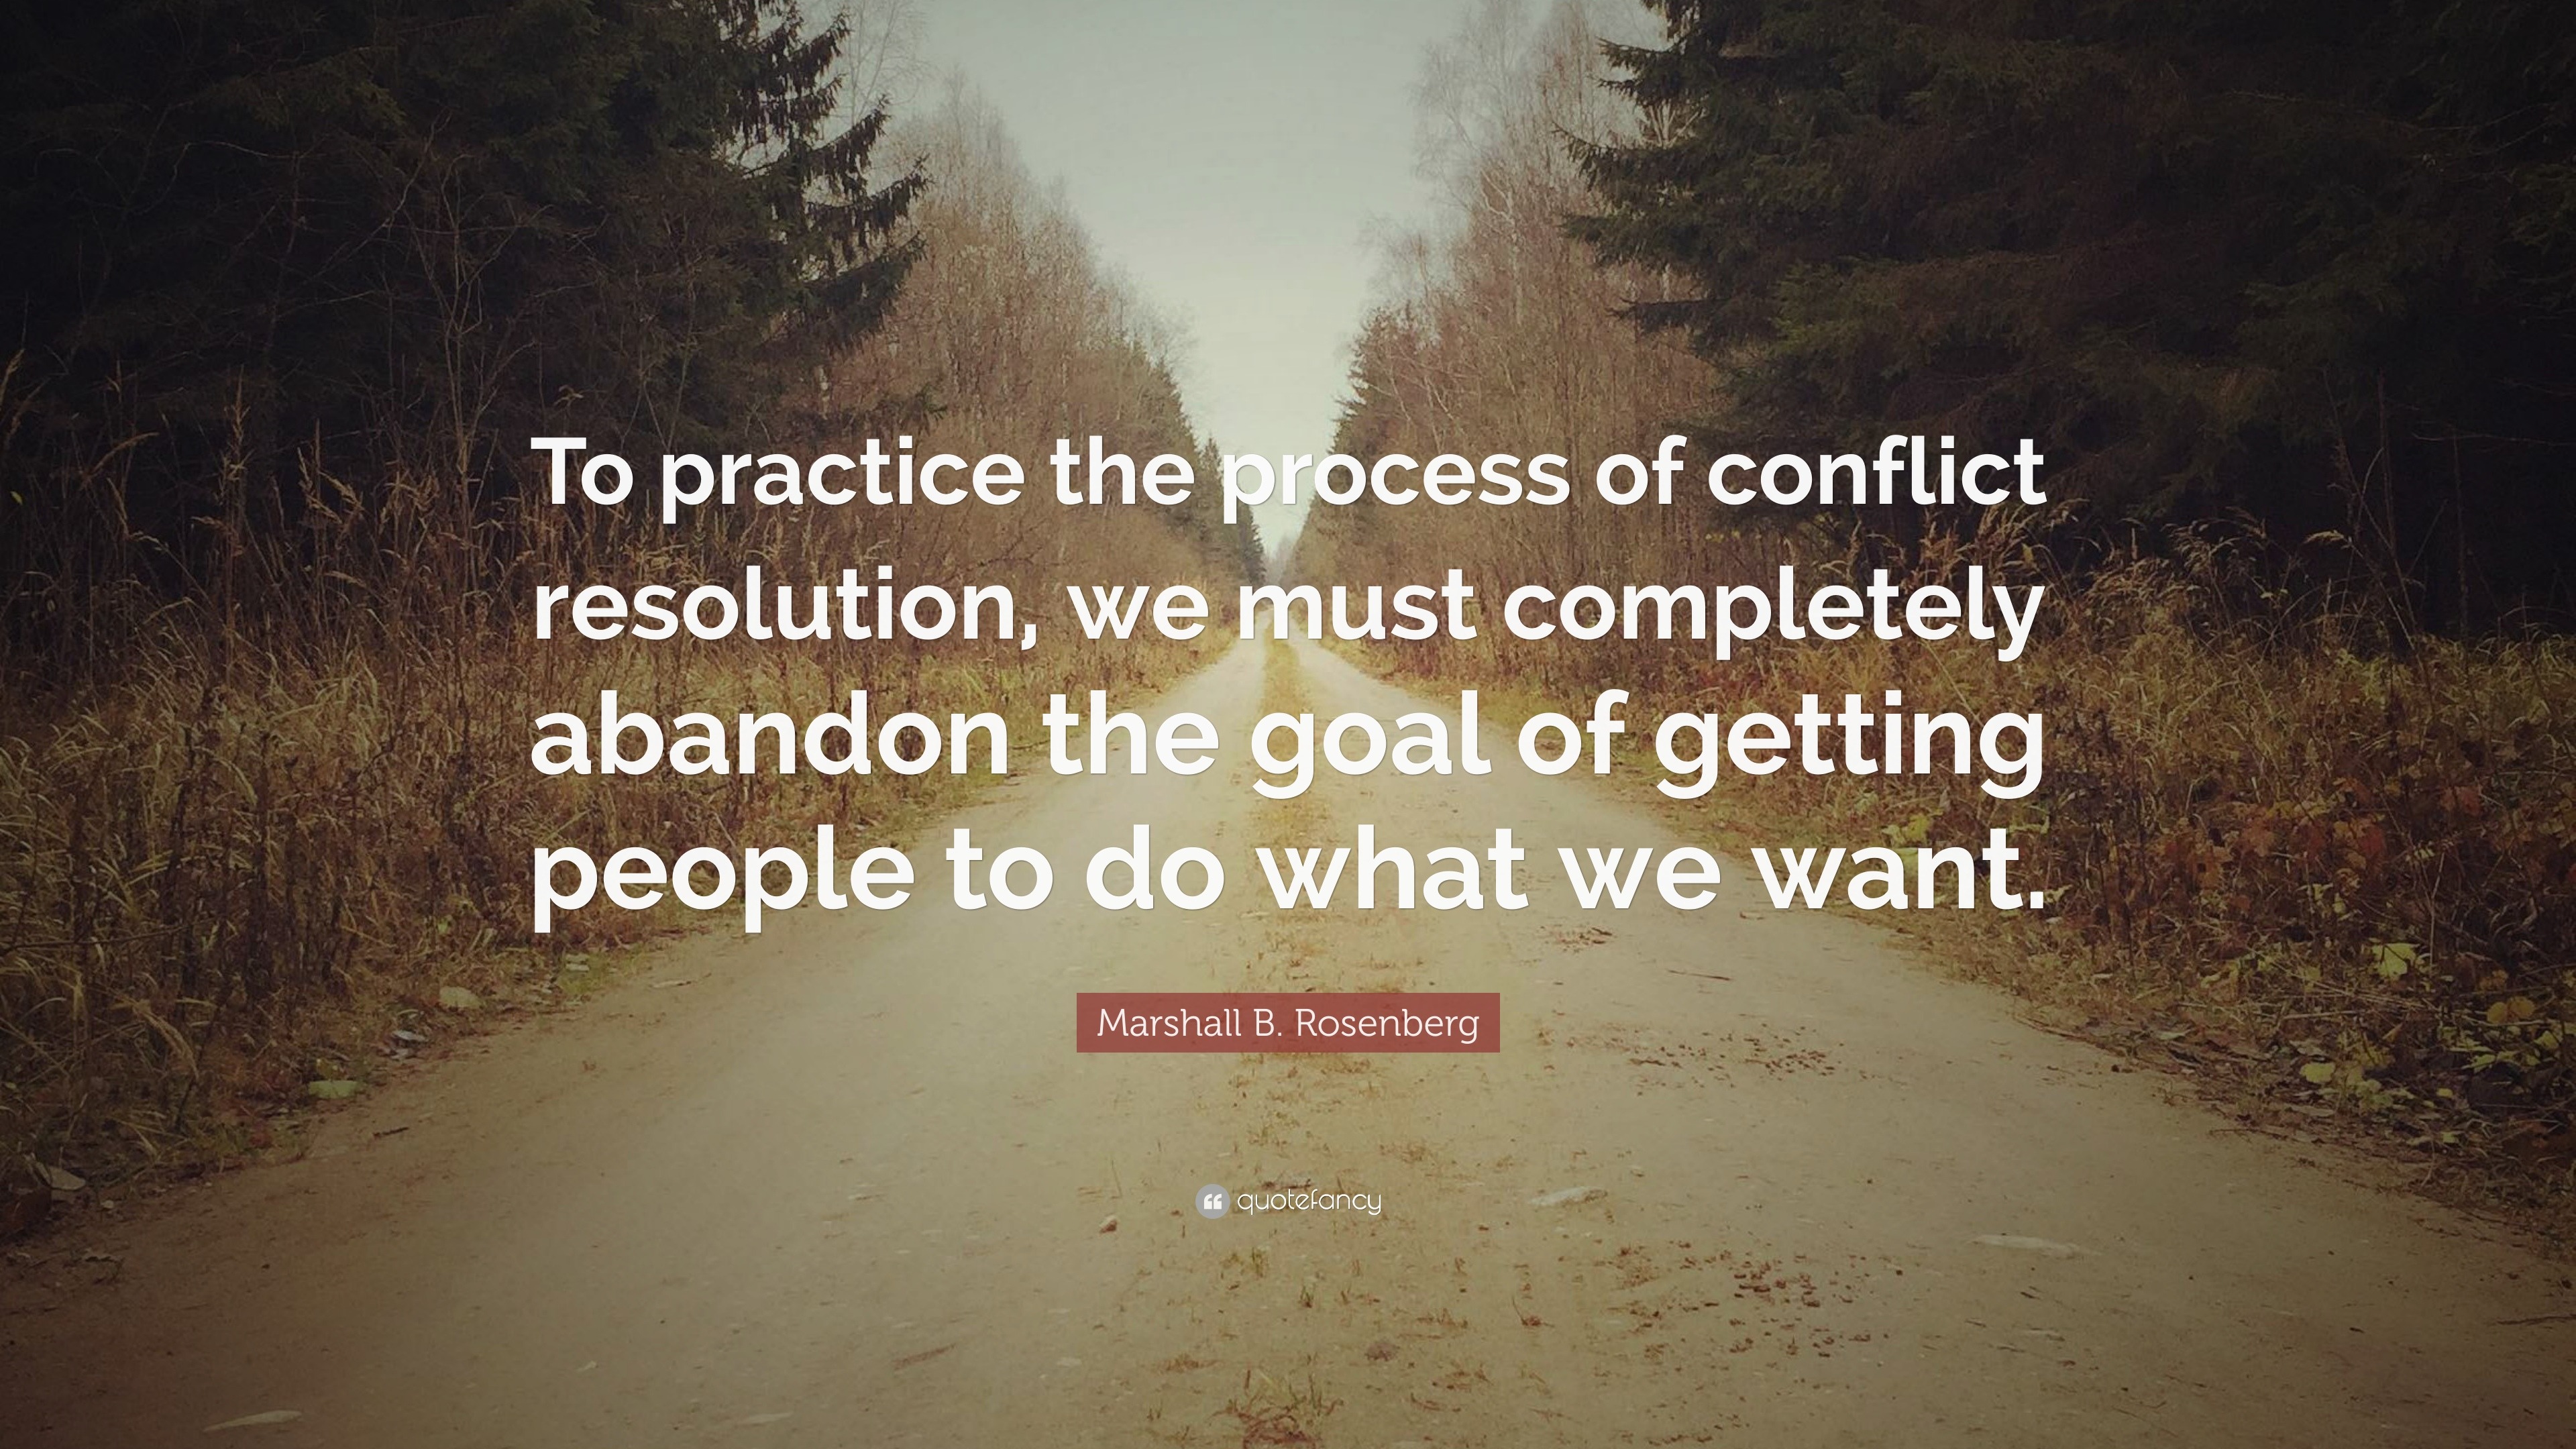 quotes on conflict resolution